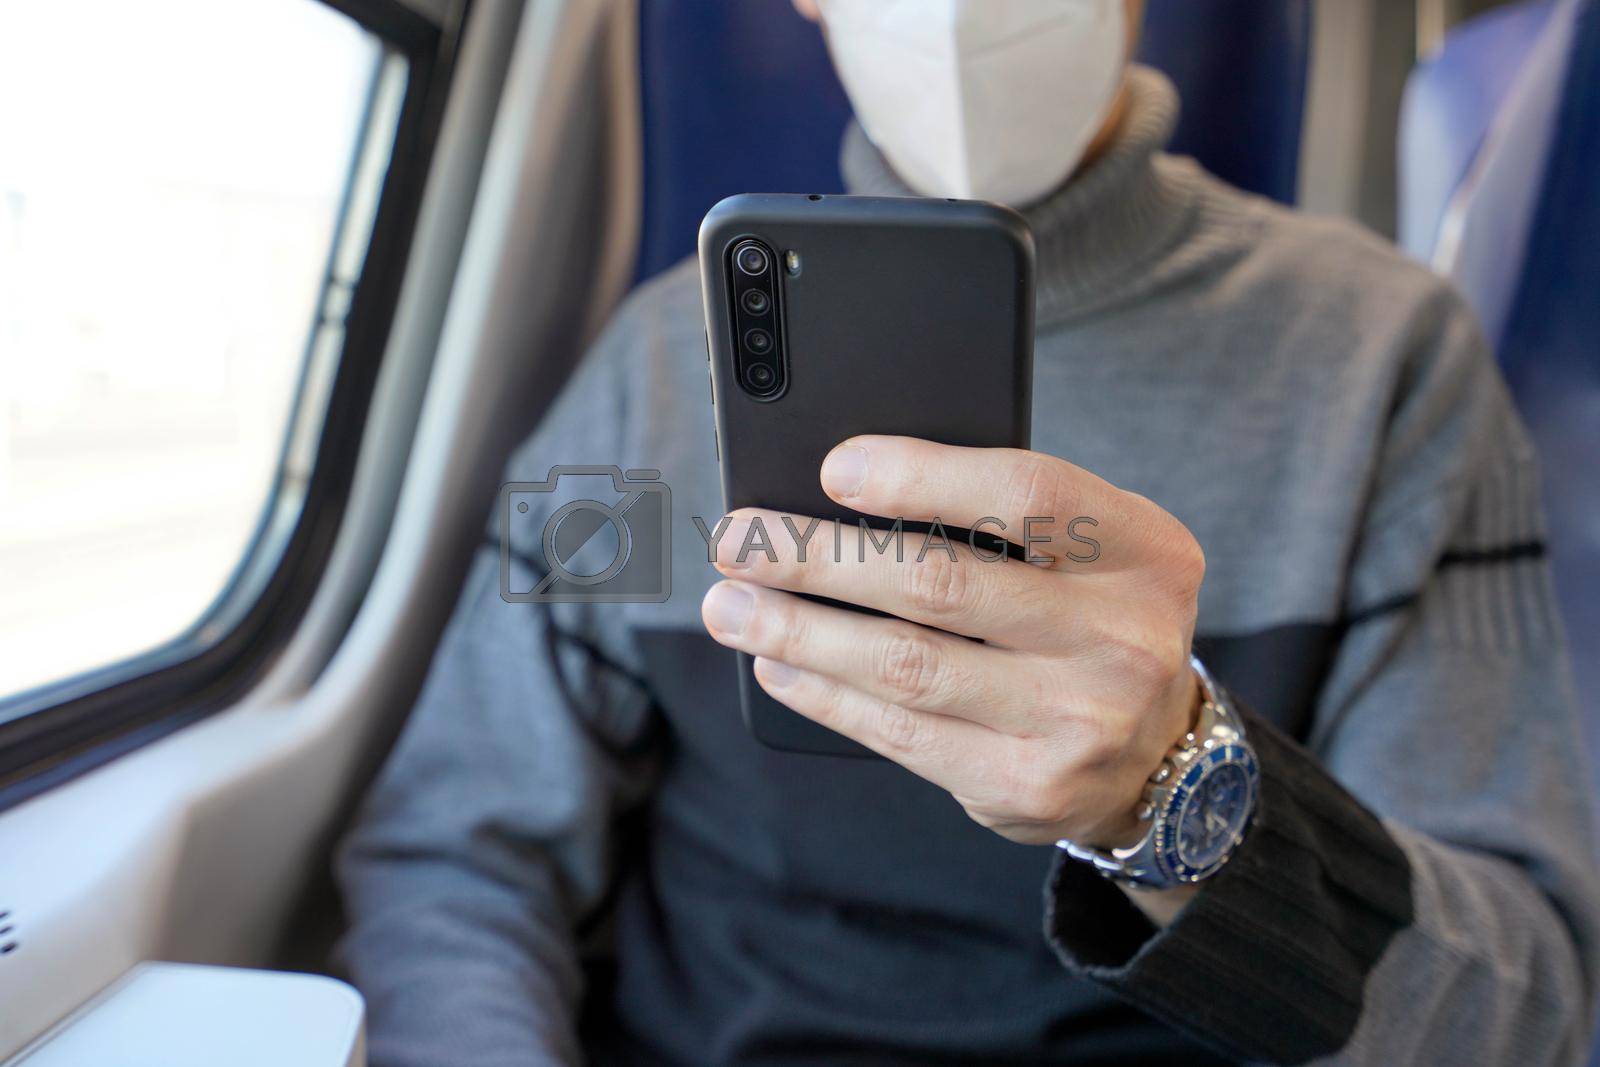 Business man on public transport using mobile app wearing protective face mask. Train passenger holding smartphone covering face with mask KN95 FFP2. Focus on the phone.